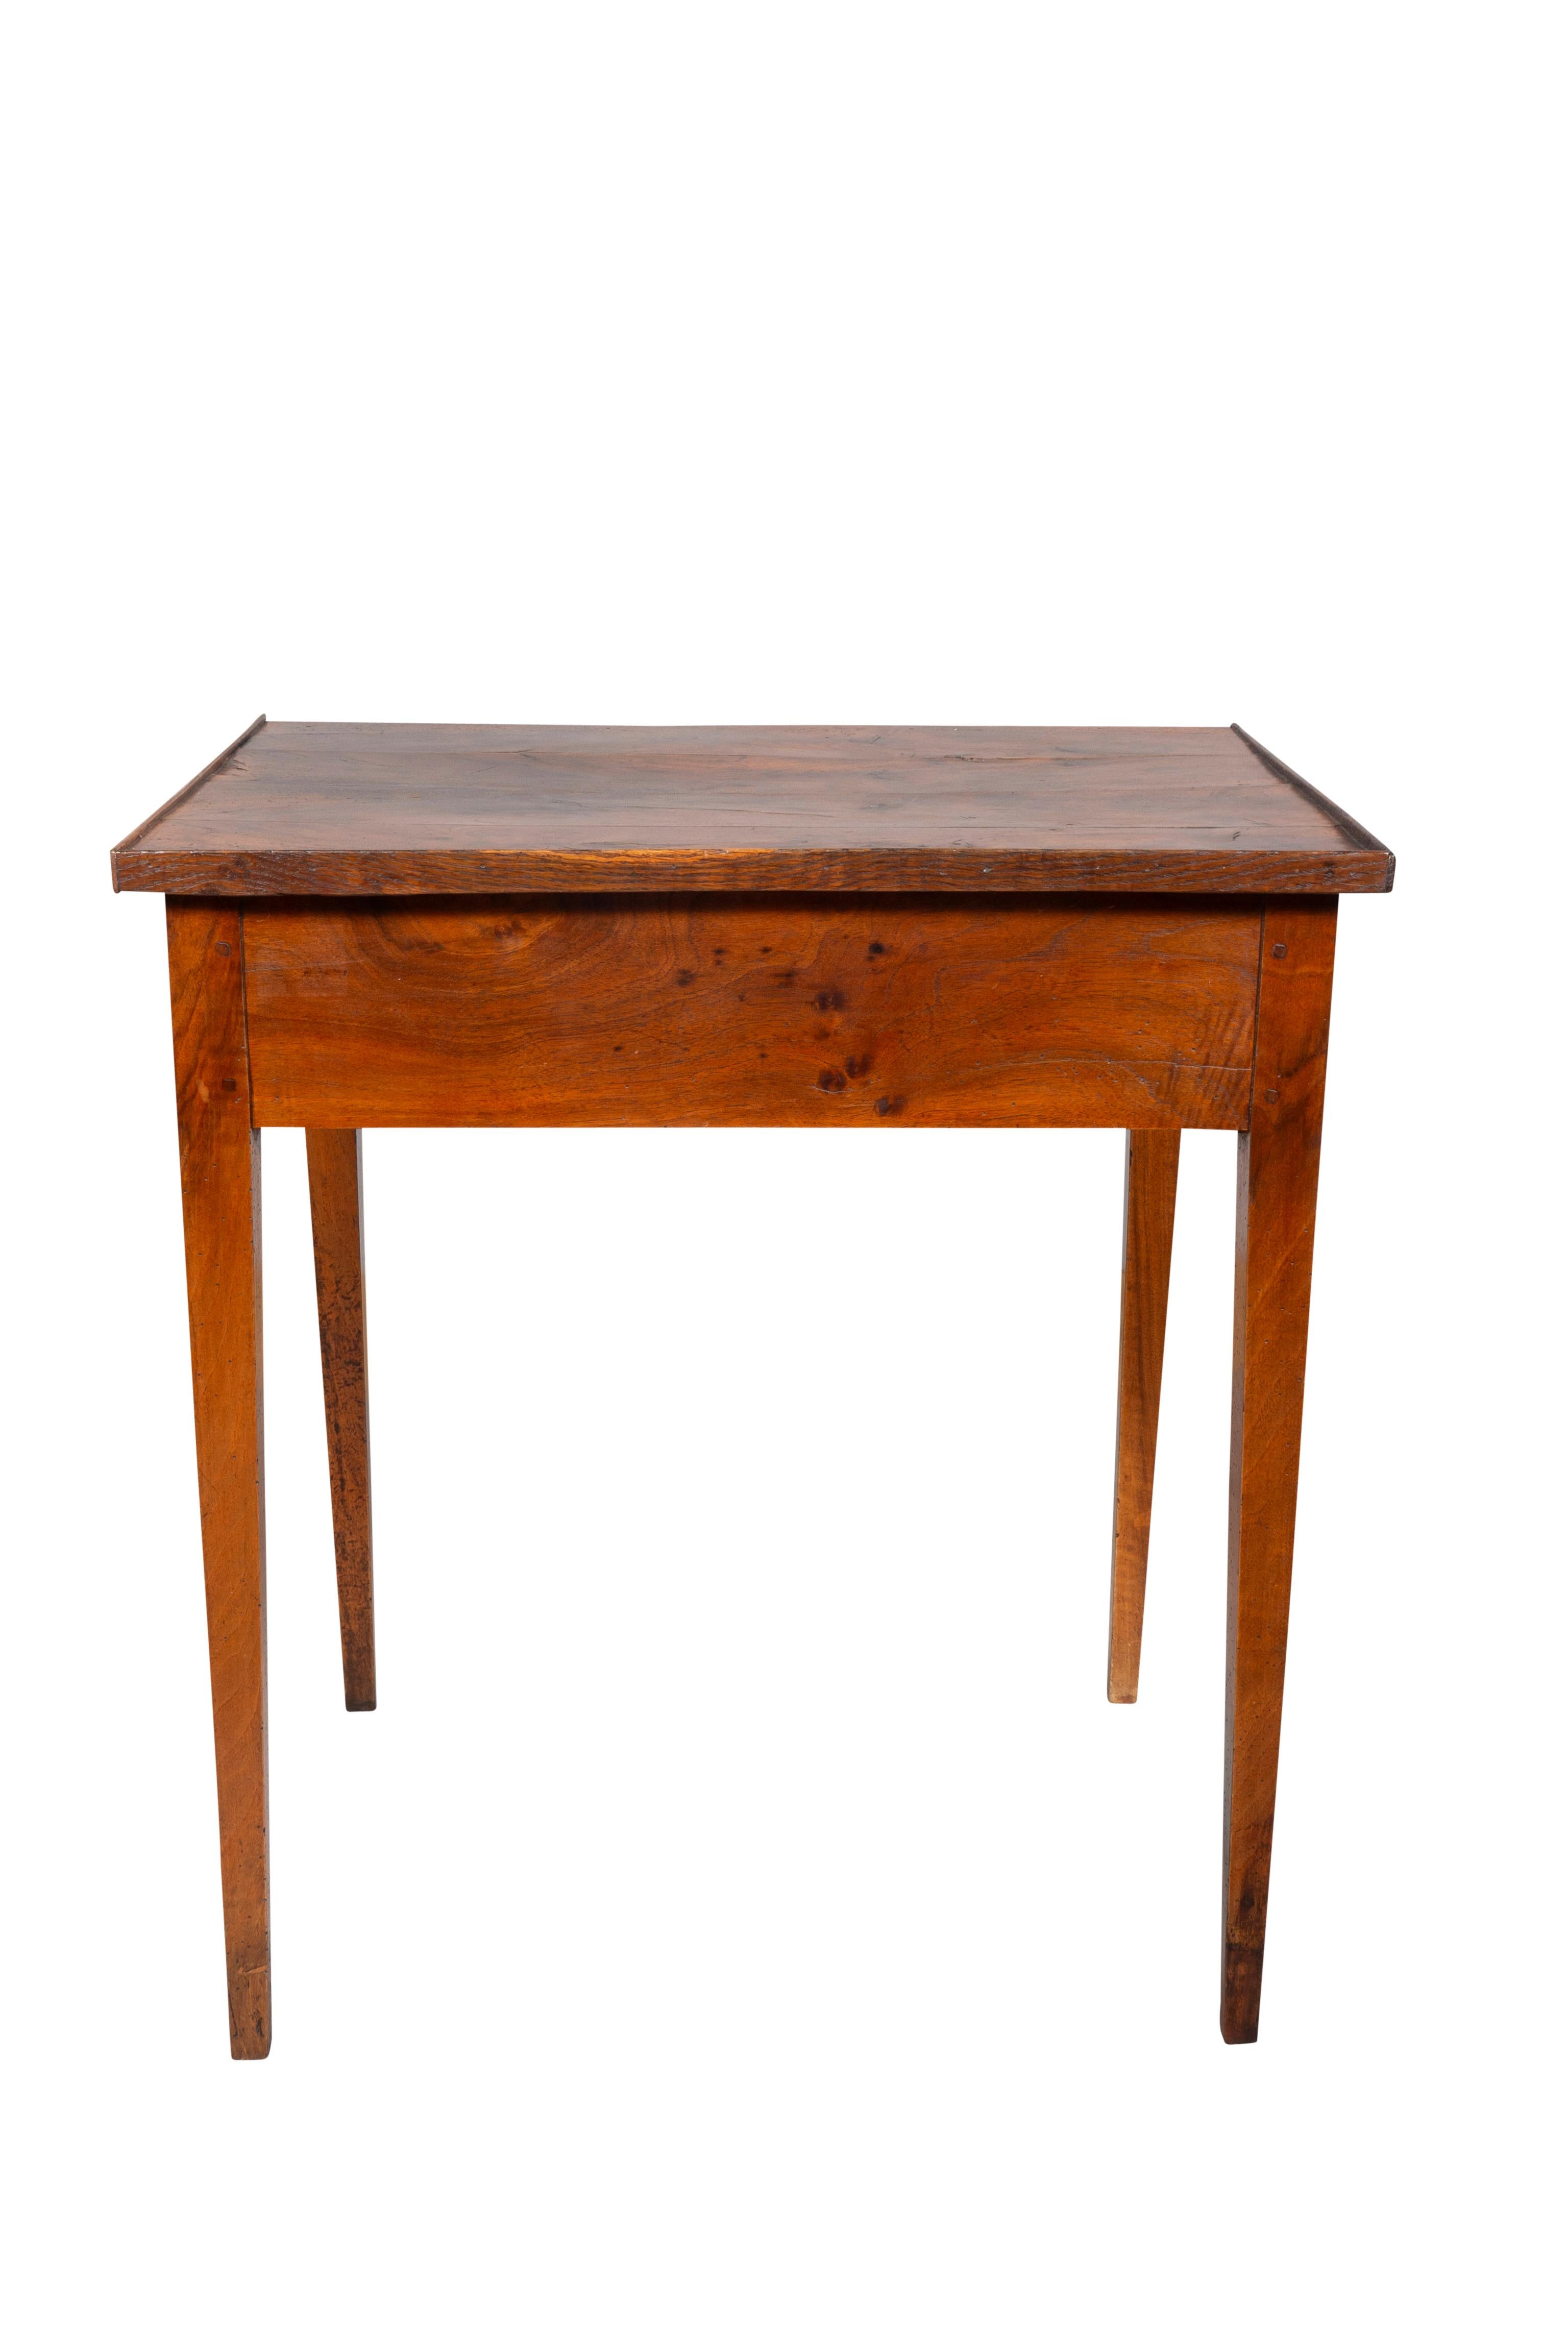 19th Century Directoire Provincial Walnut Table For Sale